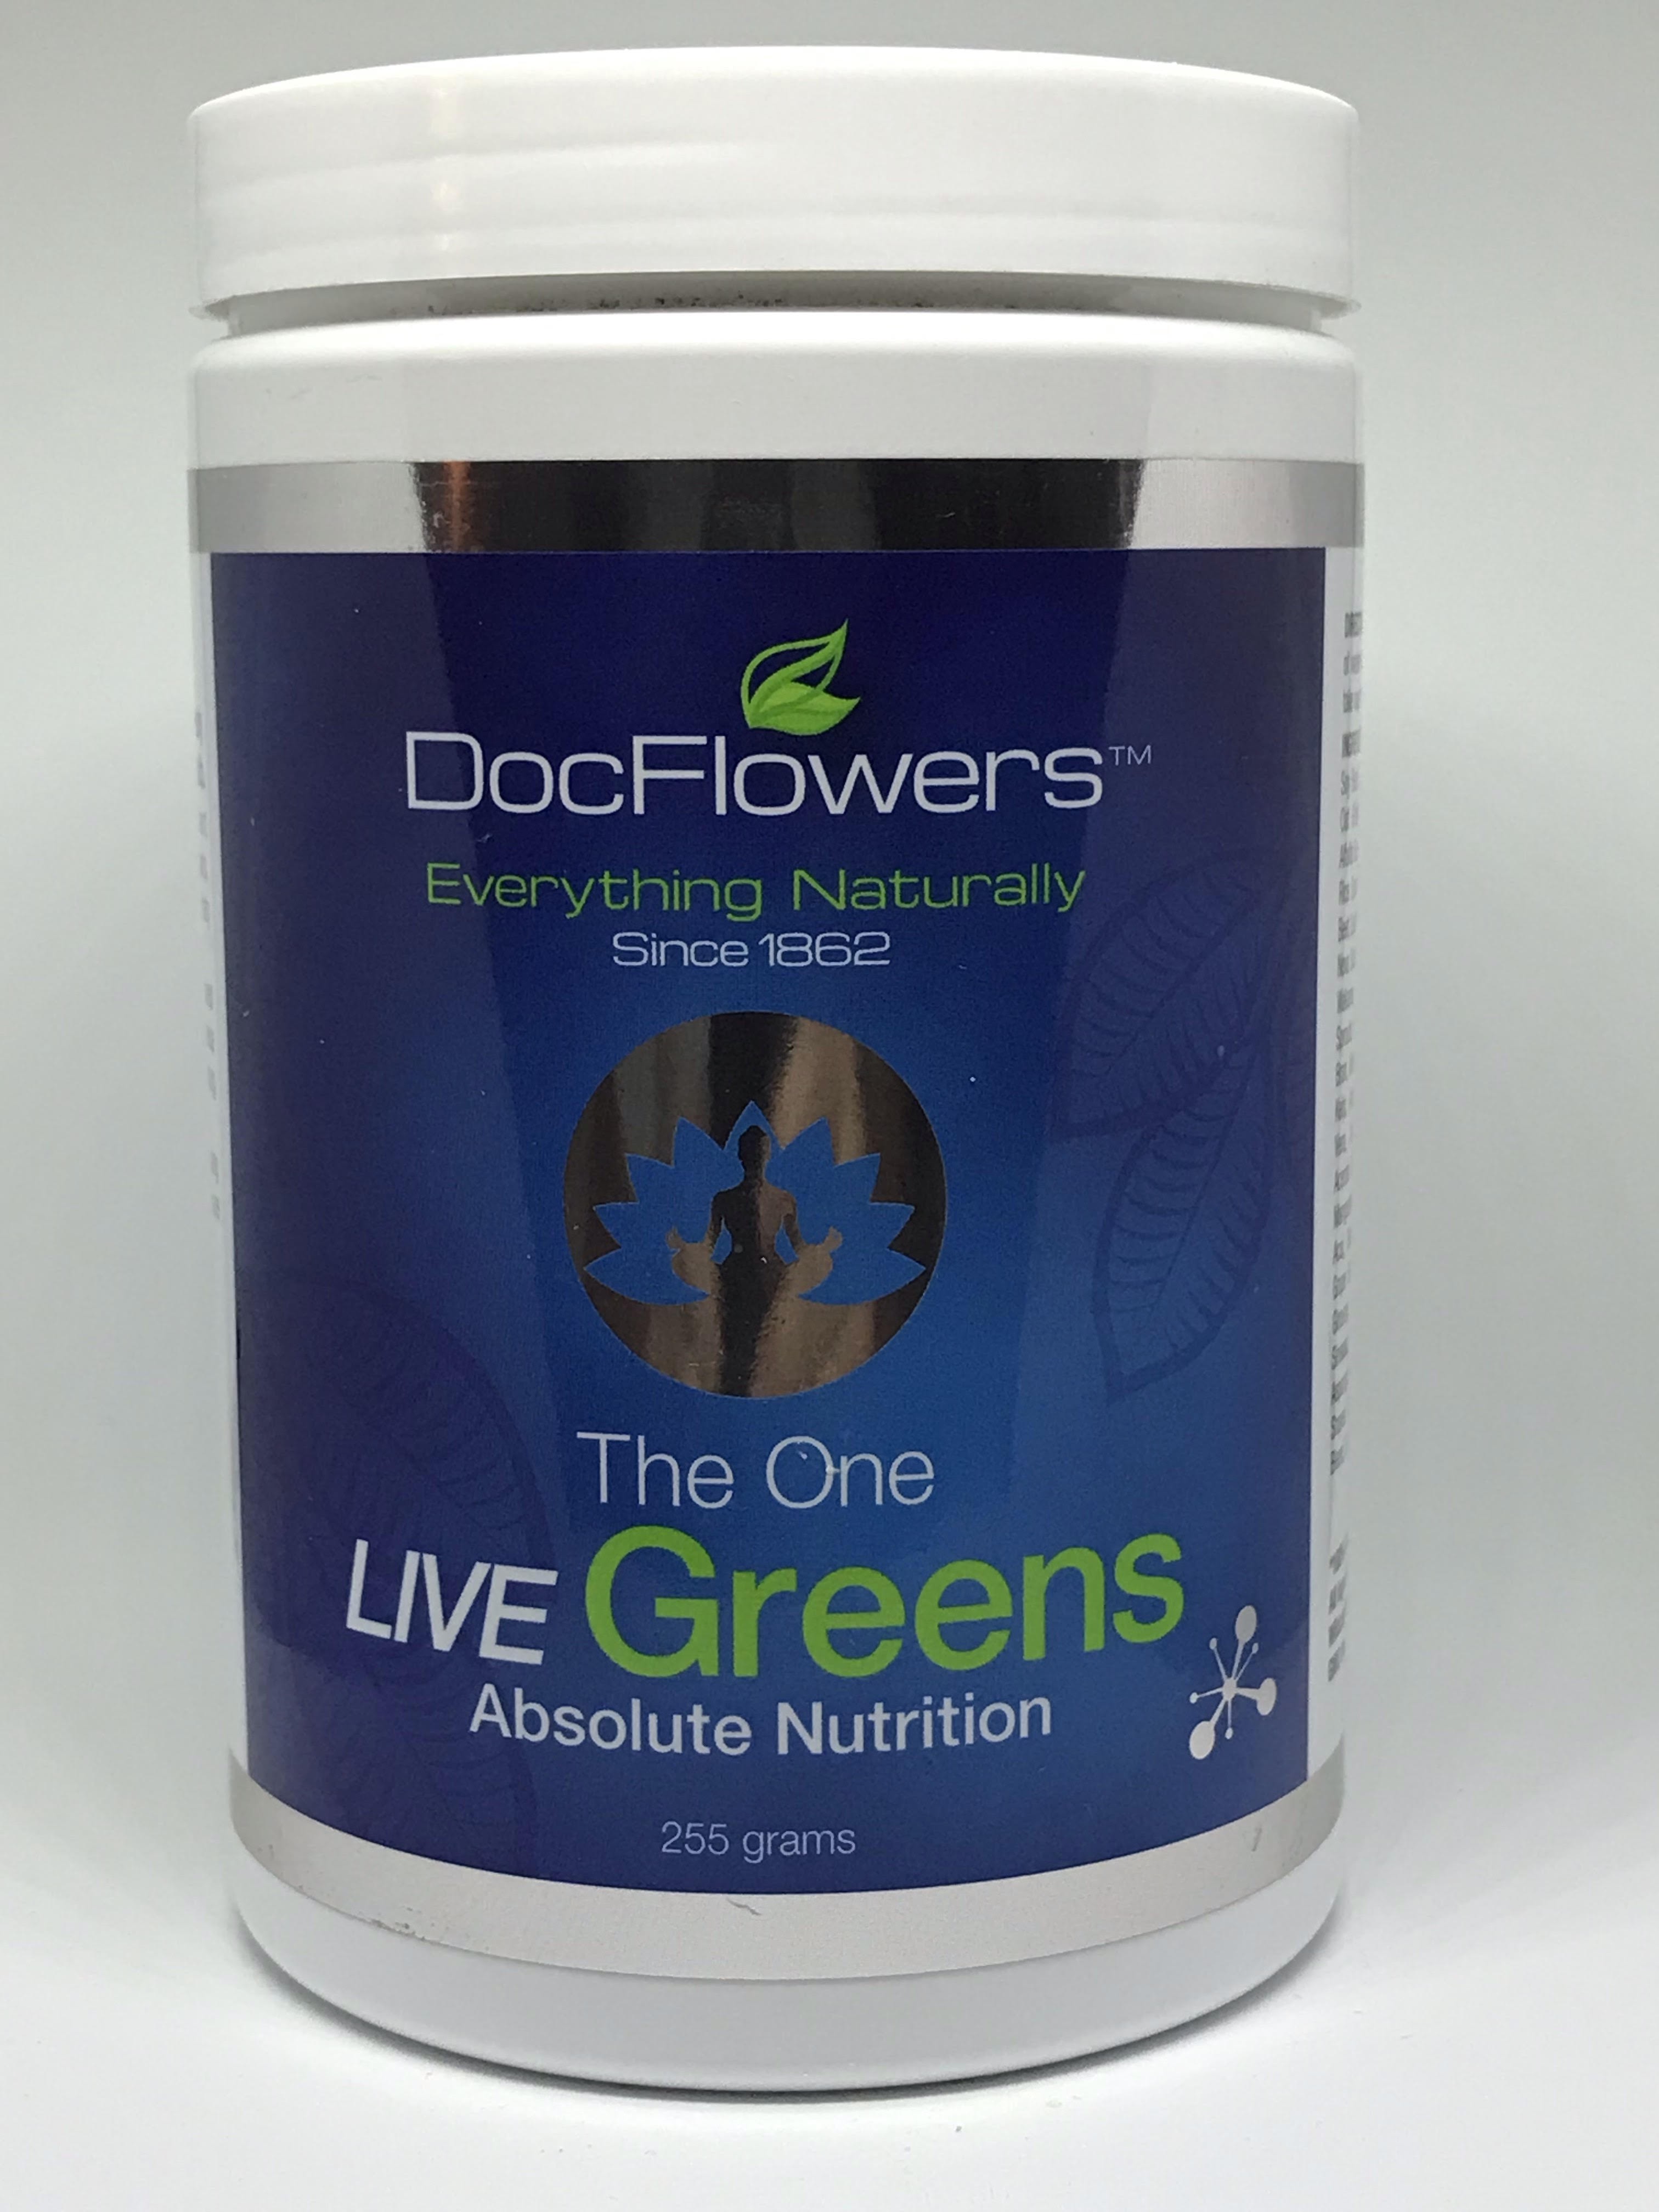 The One Green Superfood